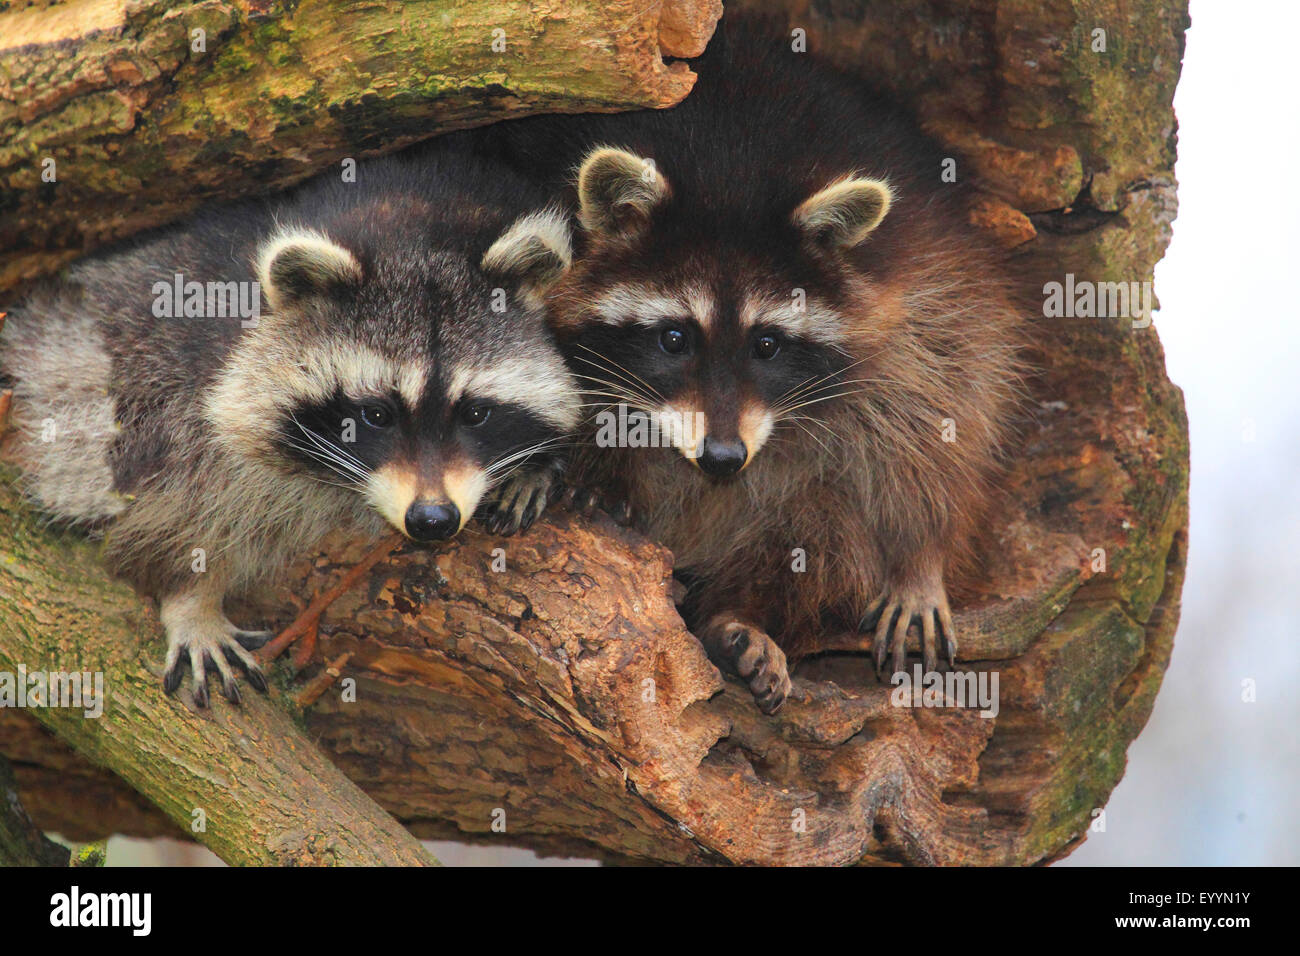 common raccoon (Procyon lotor), two raccoons sit on an old tree, Germany Stock Photo